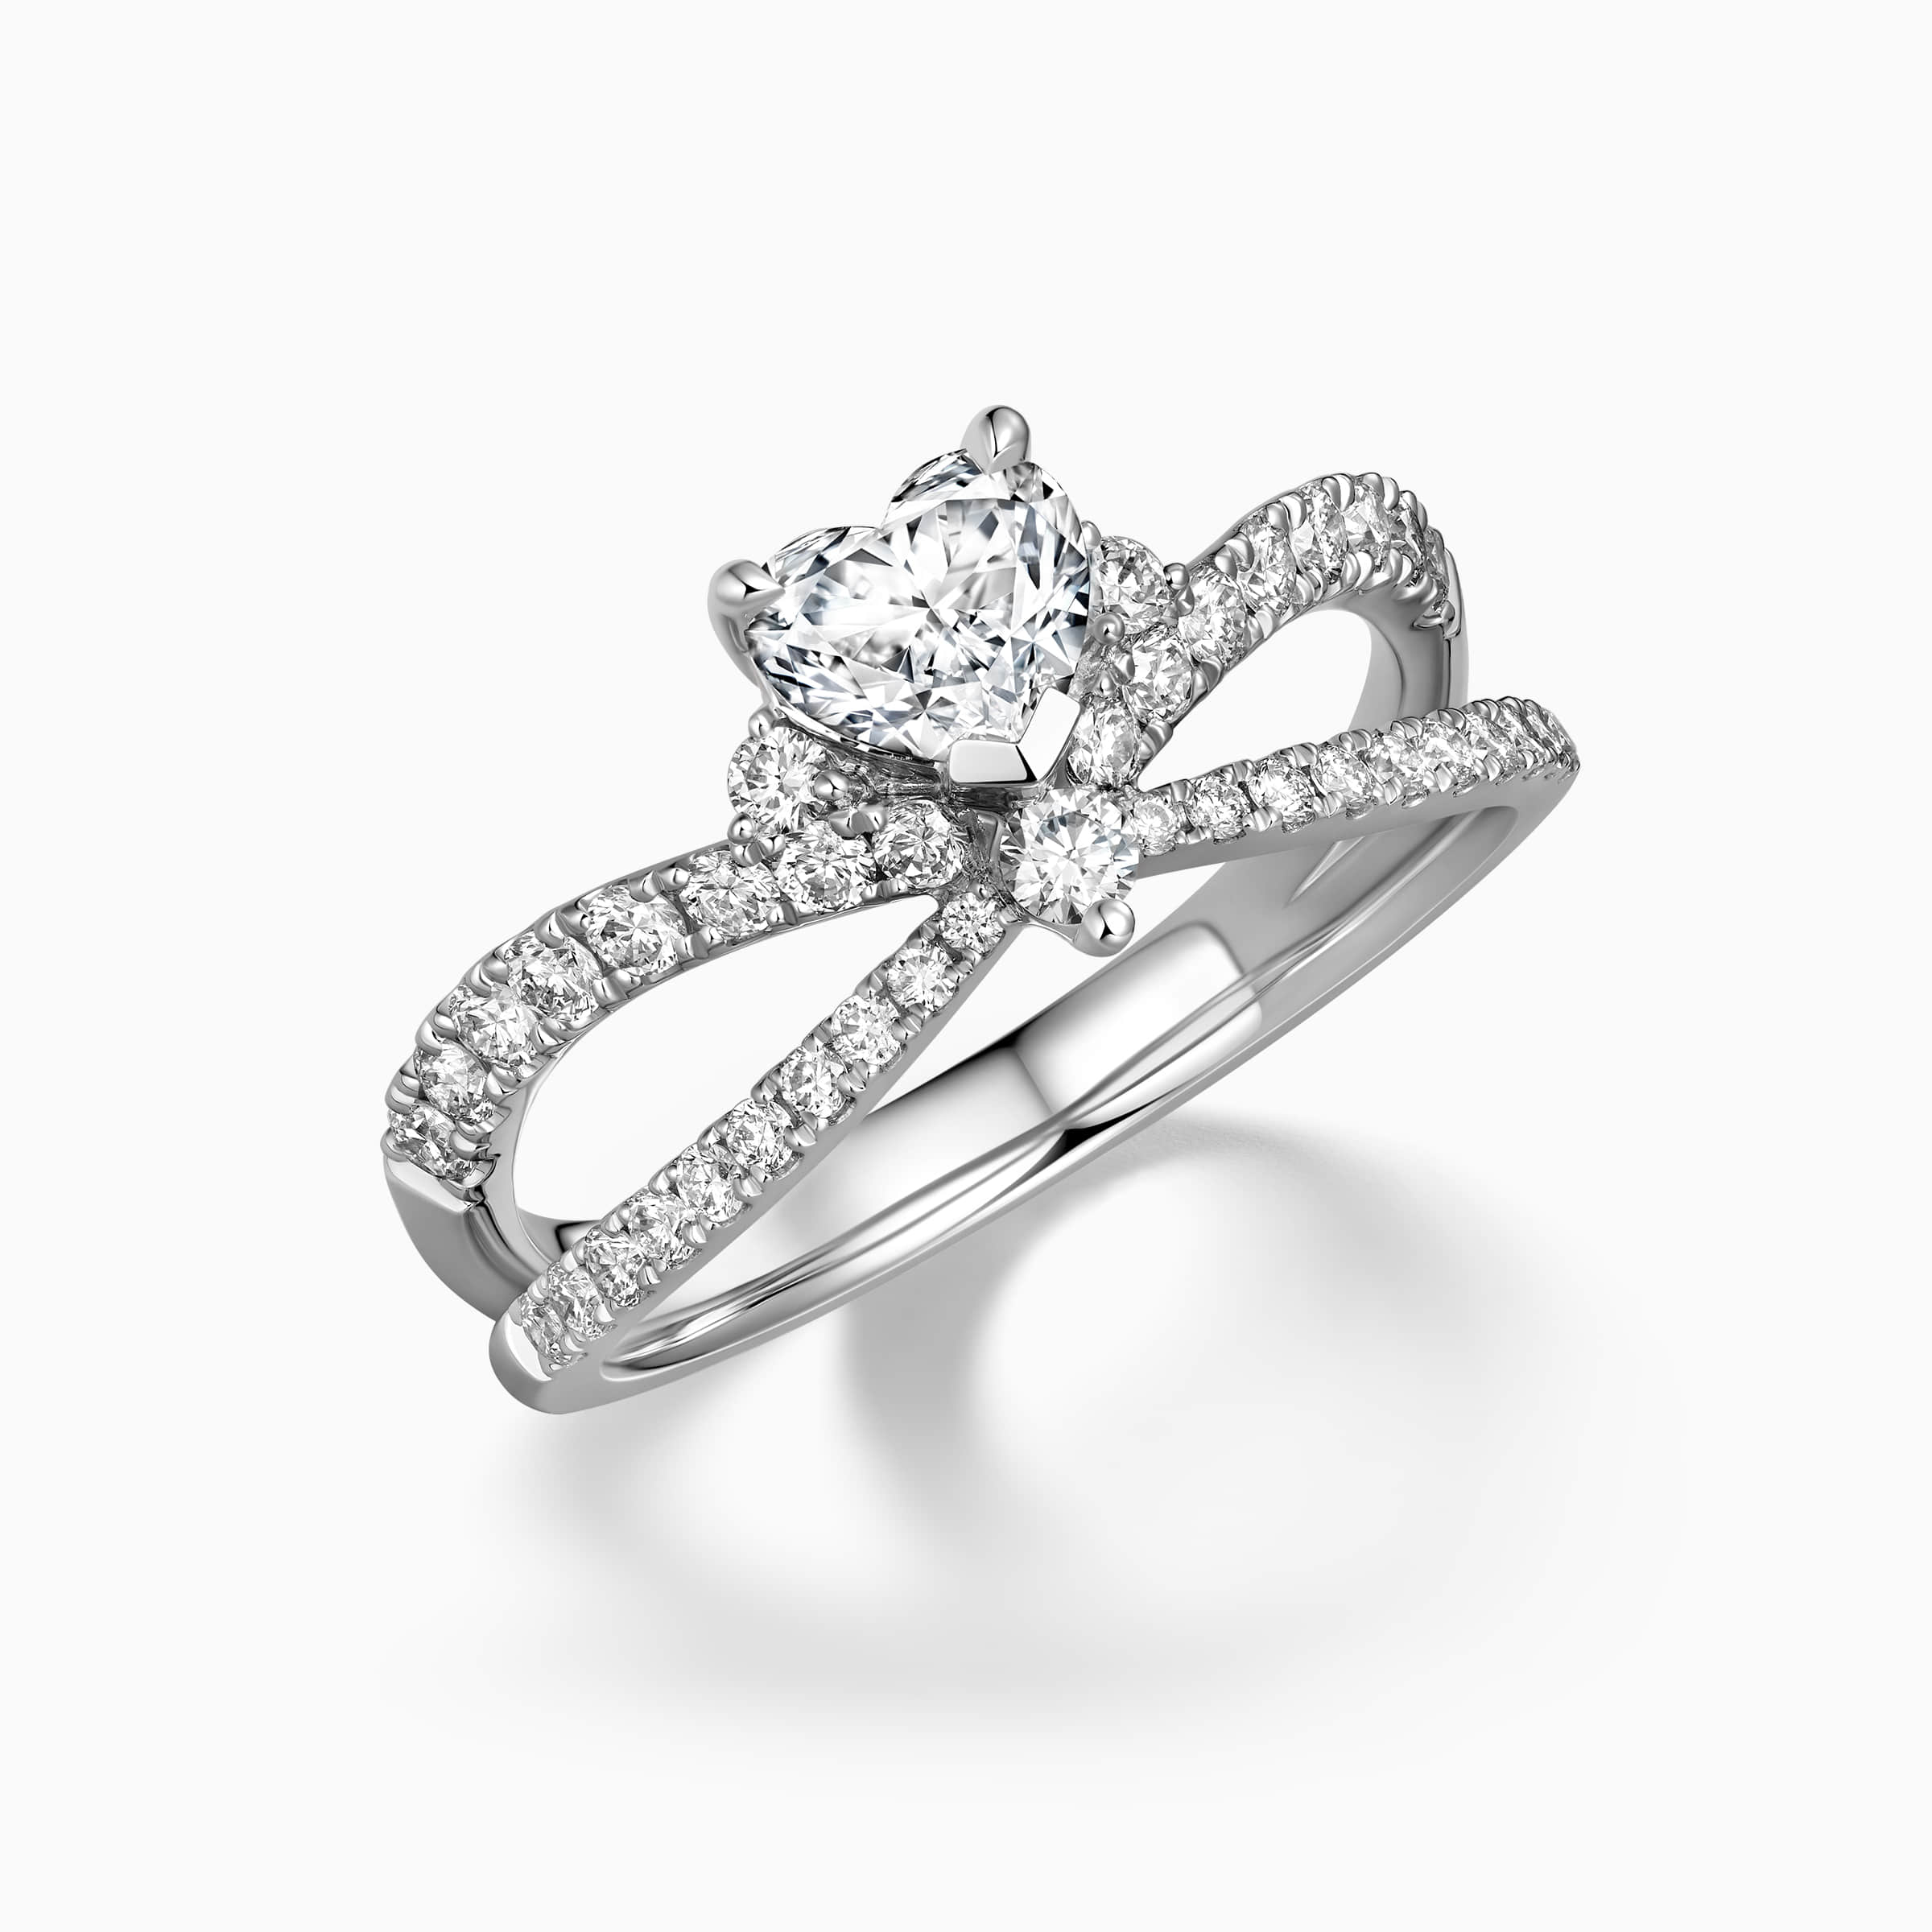 Darry Ring crown engagement ring